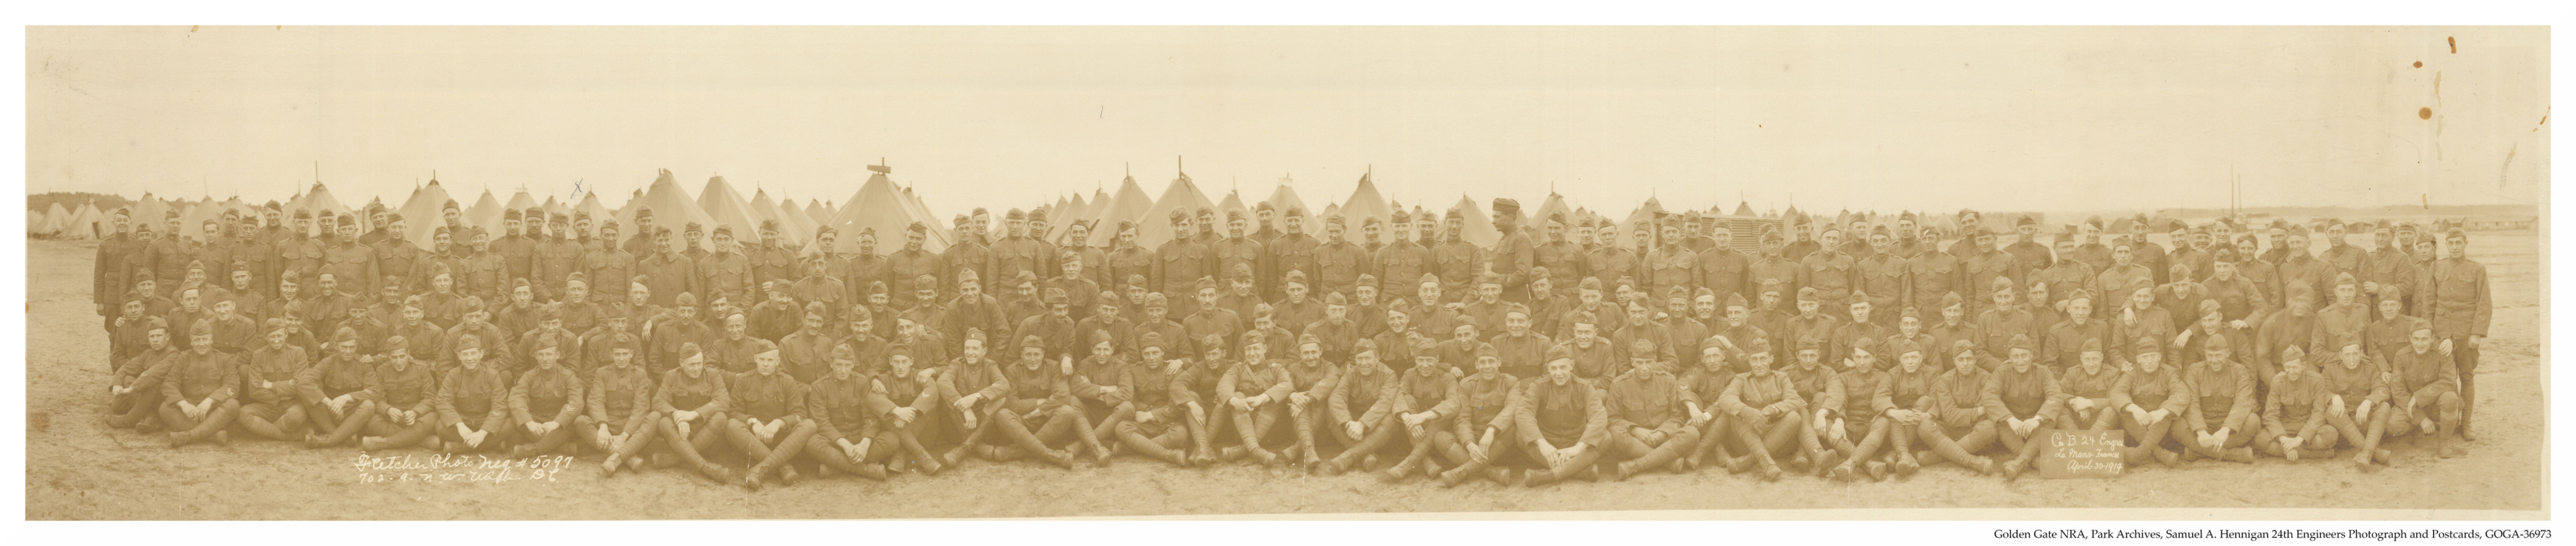 Company "B" of the 24th engineers taken in Le Mans France in 1919 